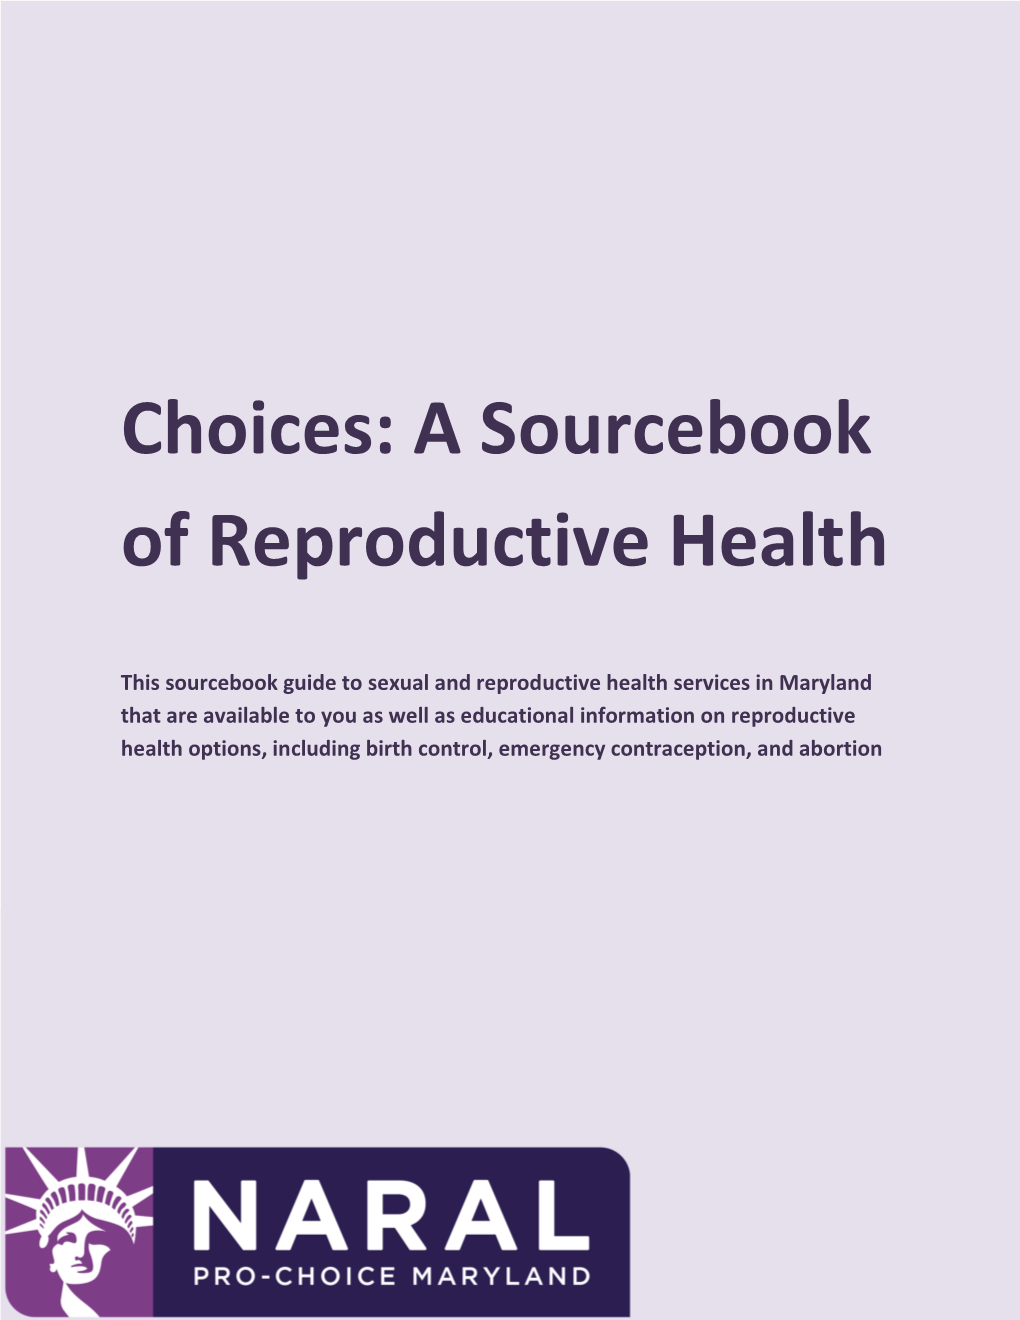 Choices: a Sourcebook of Reproductive Health